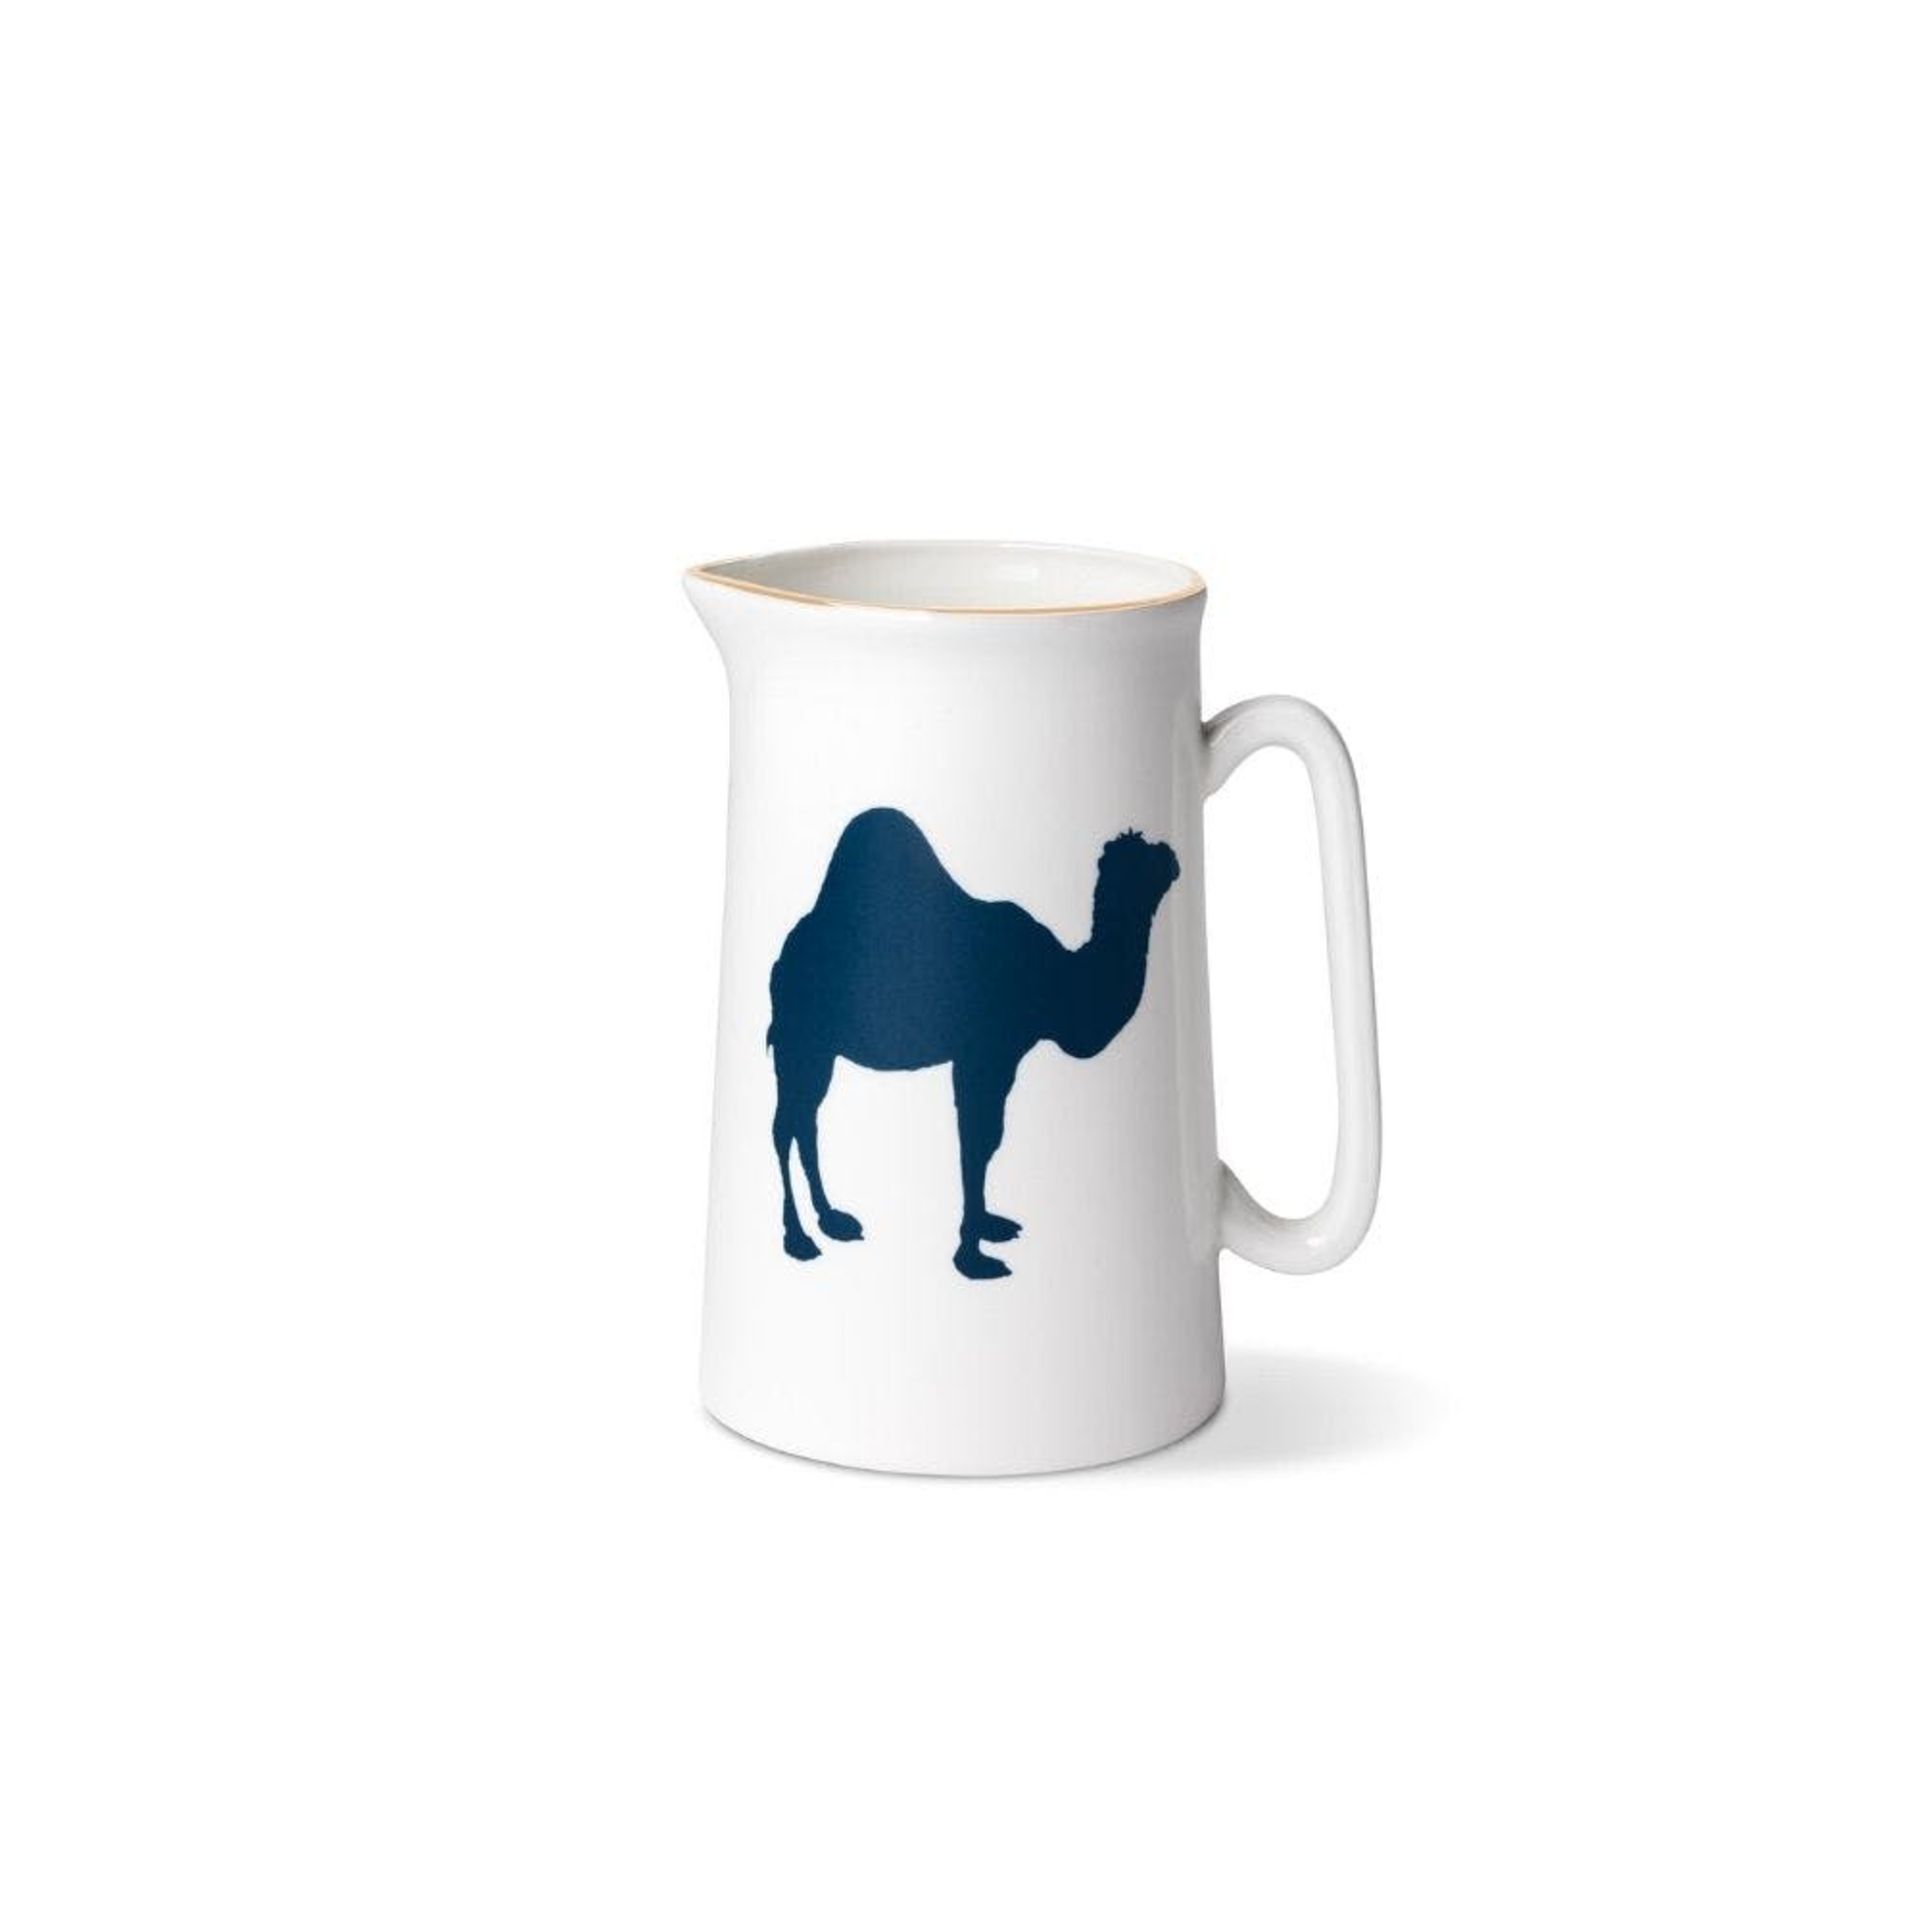 Alice Peto Camel Jug 1 Pint RRP 42 About the Product(s) Inspired by traditional blue-and-white china